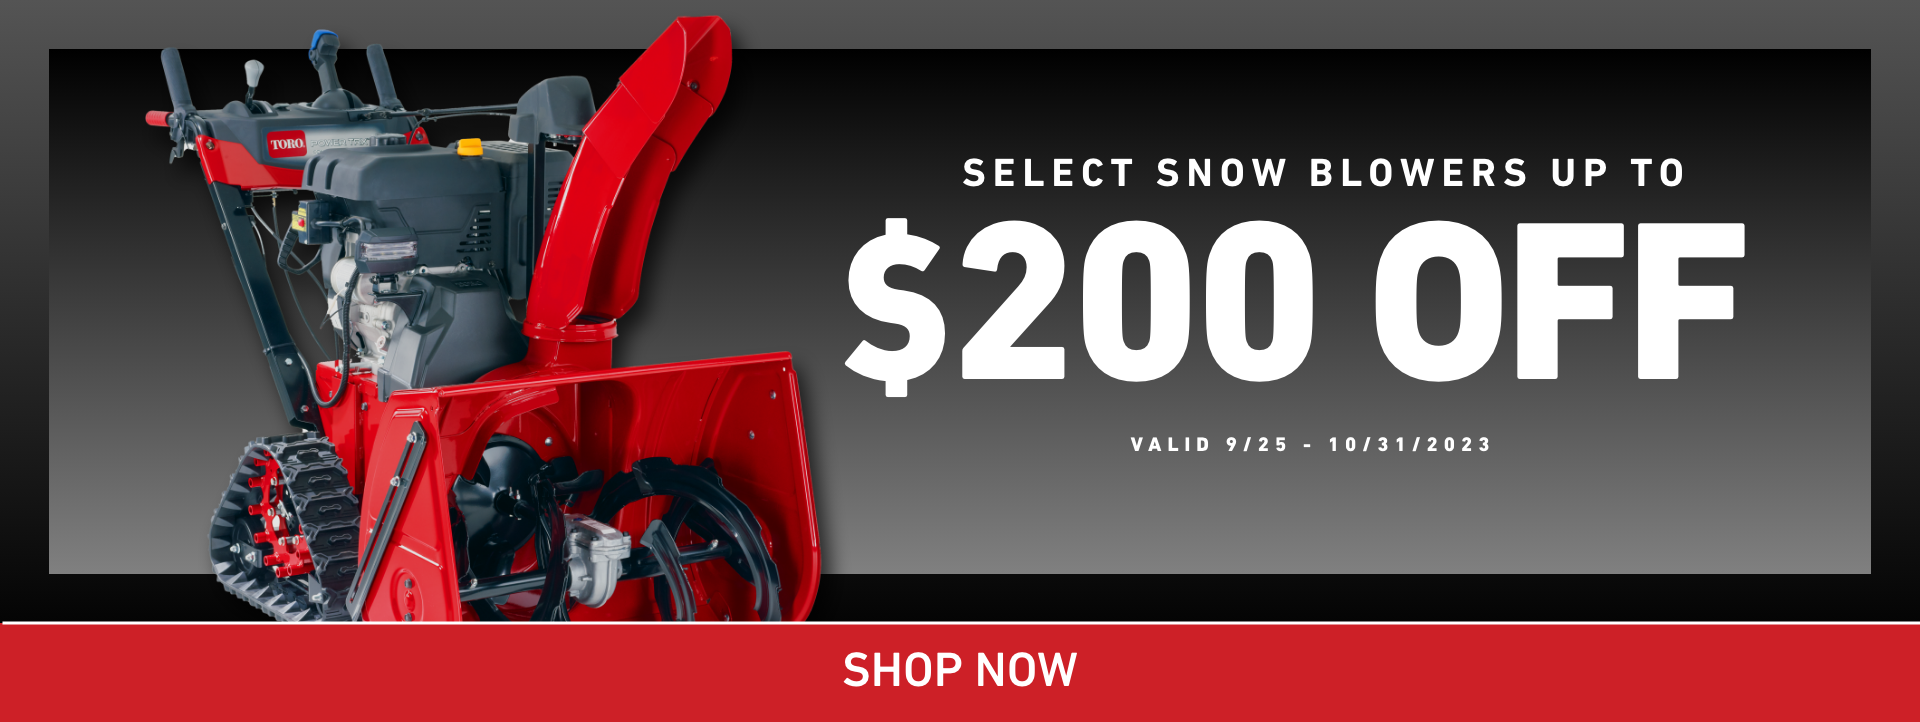 Toro Sale - Select Snow Blowers up to $200 Off